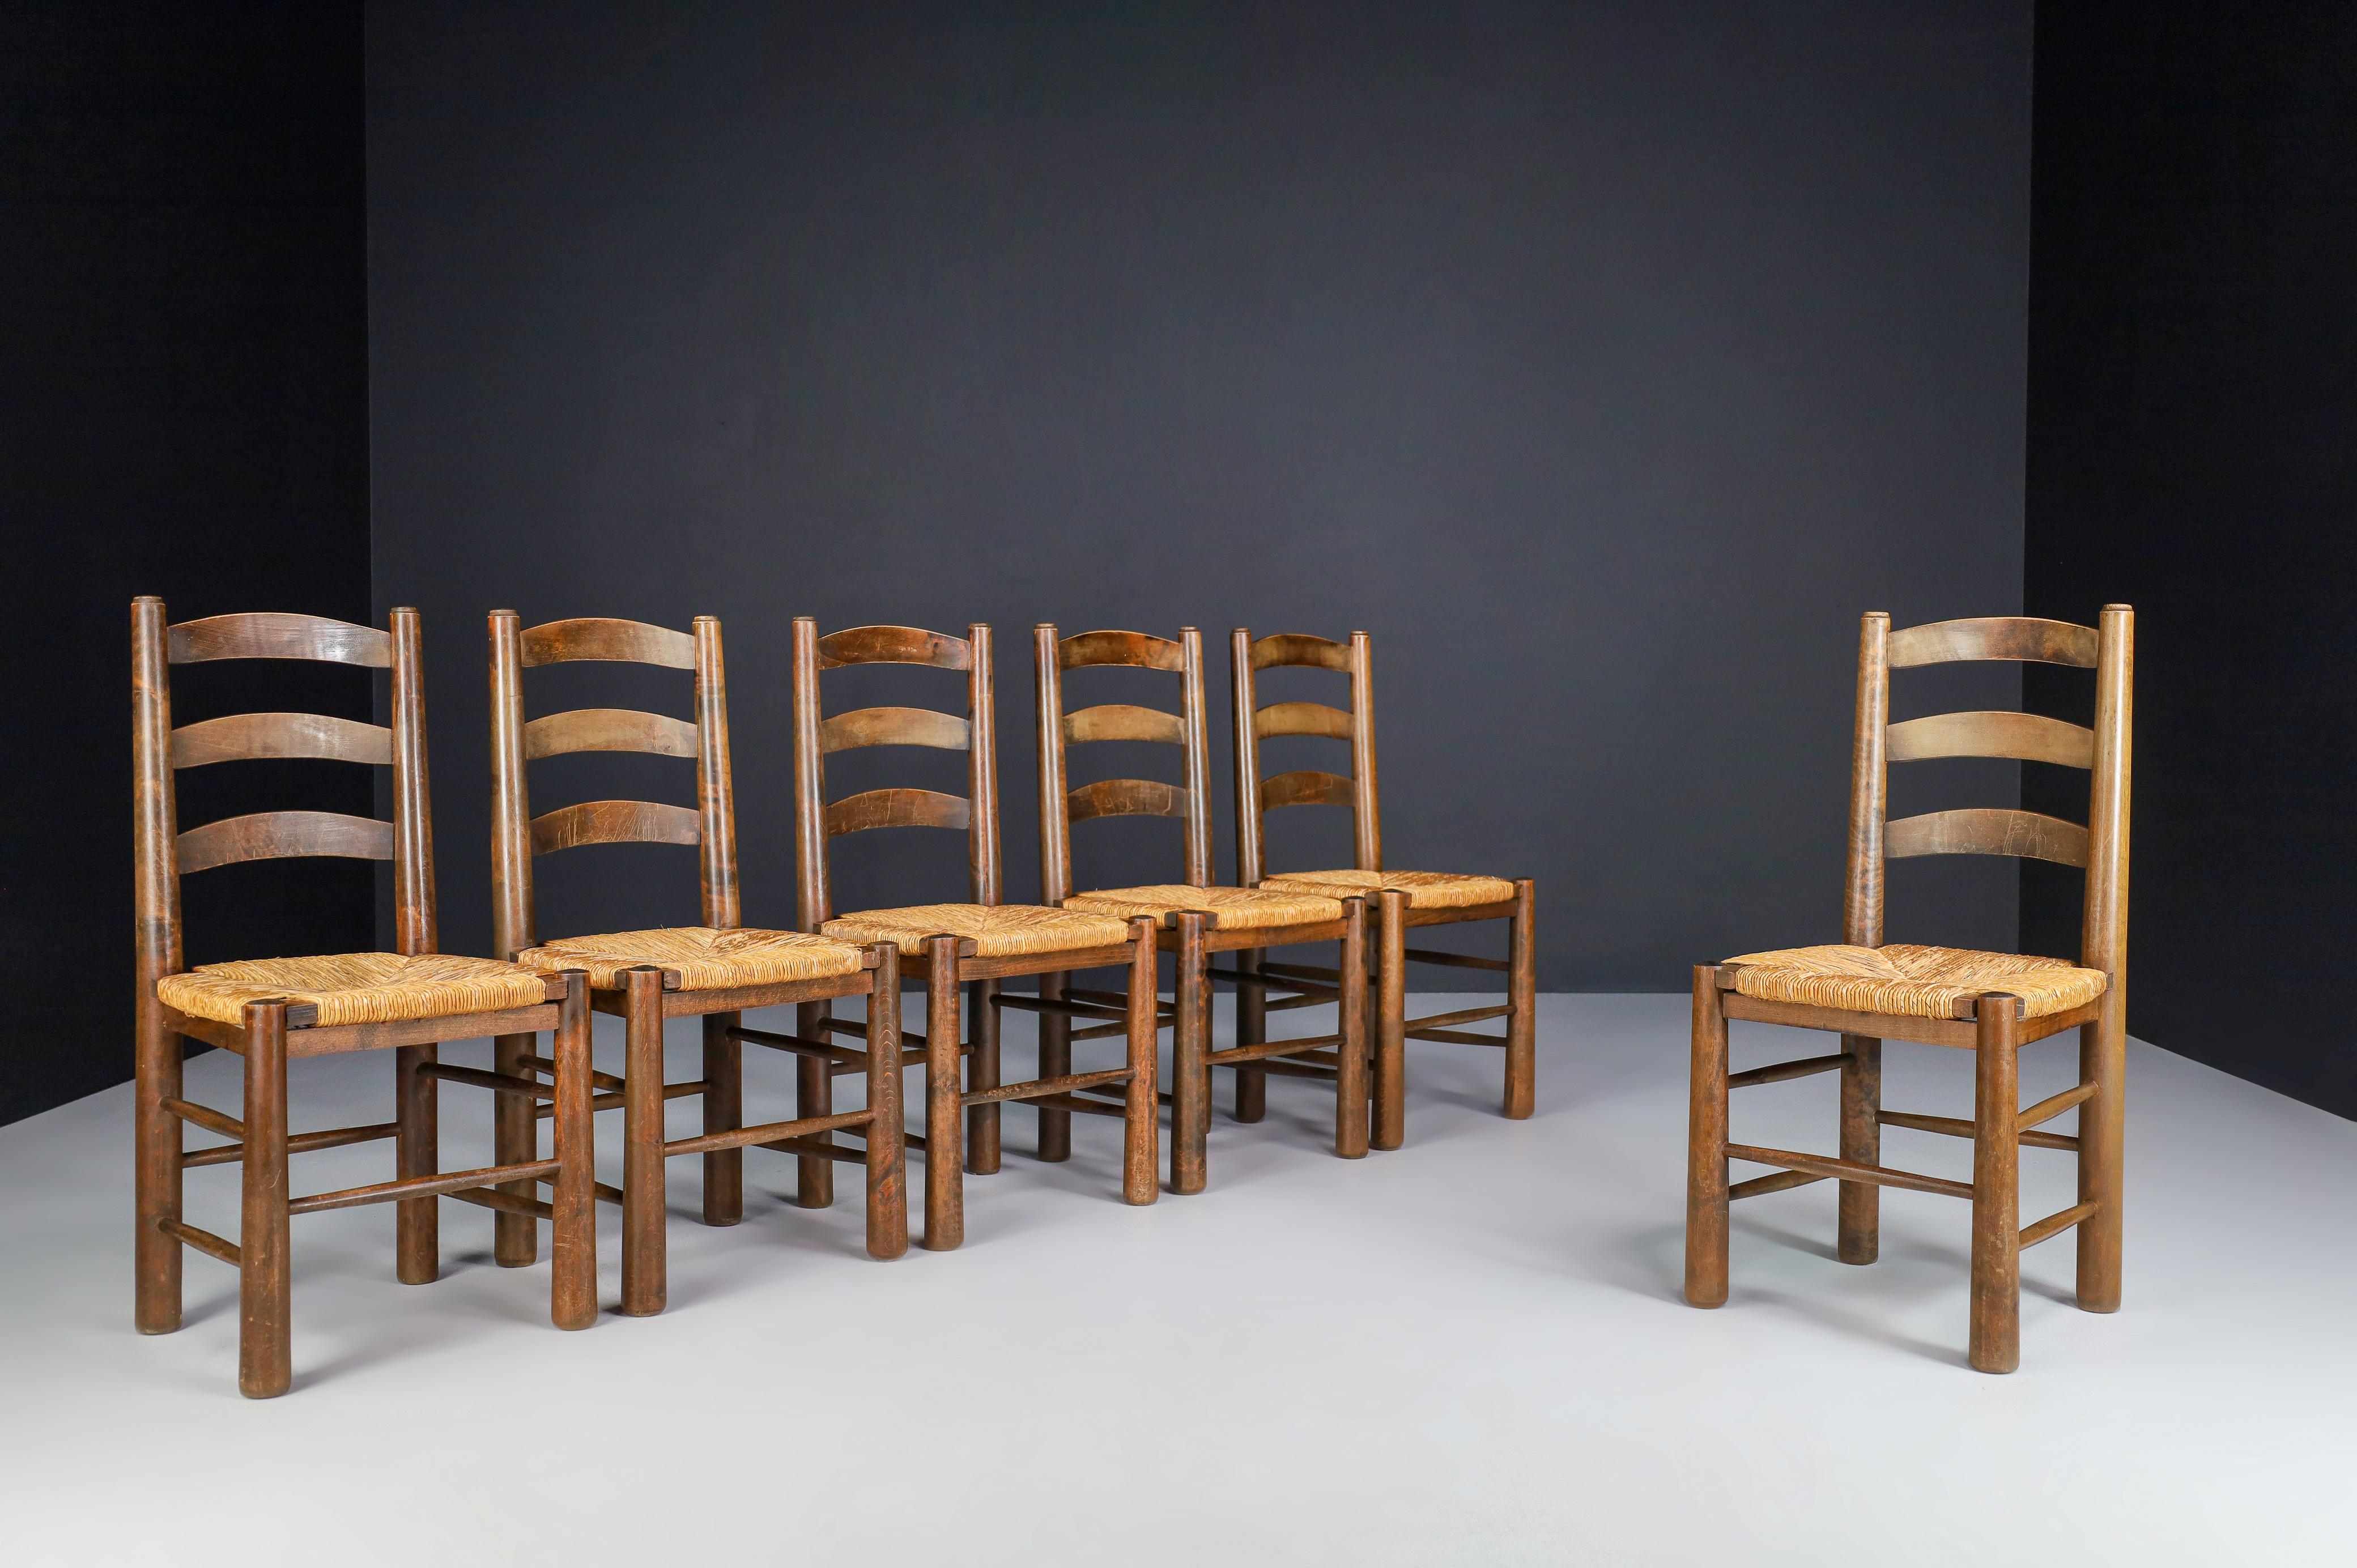 Georges Robert dining chairs in oak and rush, France 1950s

Set of 6 Mountain or chalet chairs made by Meubles Georges Robert french cabinetmaker in the 1950s. The structure is of solid oak with conical legs. The seat is woven rush, reminiscent of